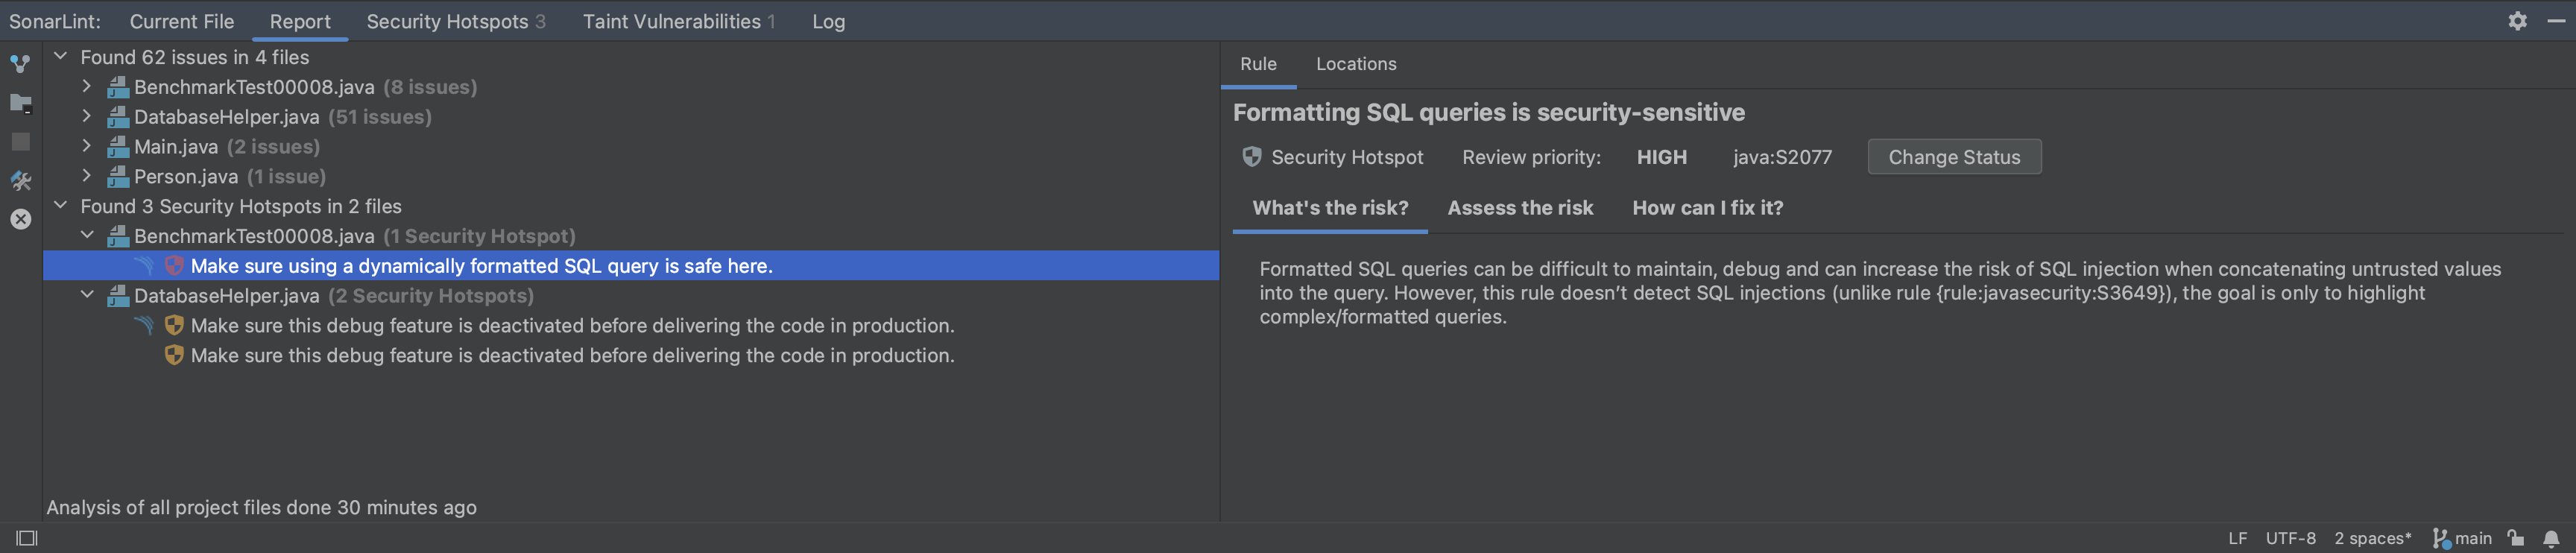 Security hotspots are separated from regular issues in the SonarLint Report tab.